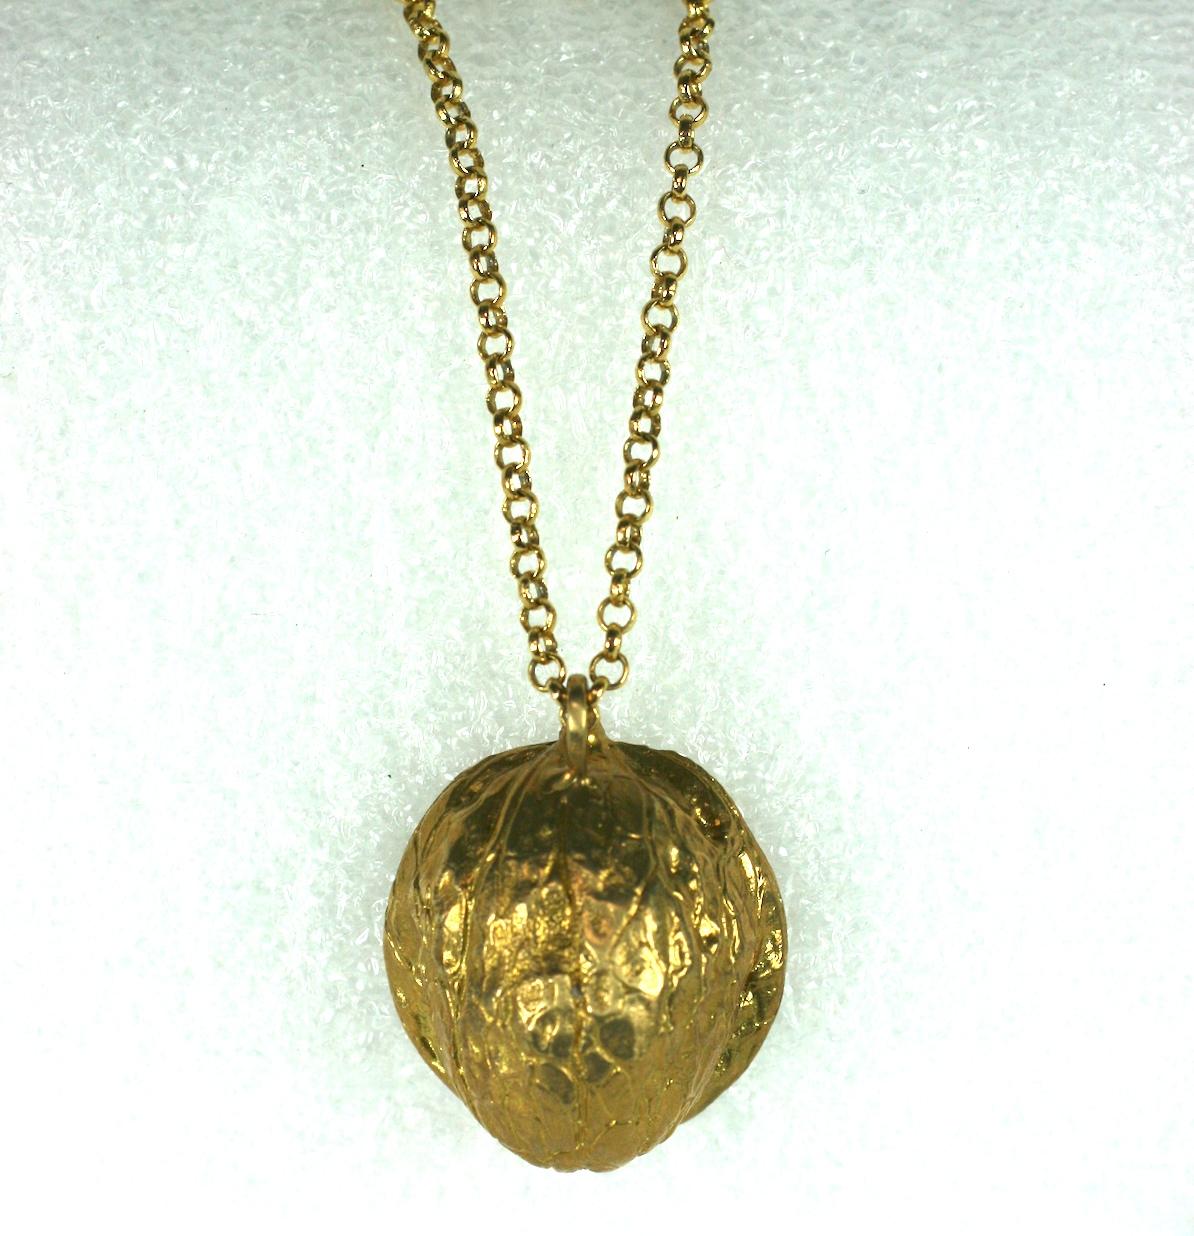 Surrealist Art Nouveau style pendant in a half walnut form with a woman's face within. Can be worn with the walnut shell out or with the face visible. 
Appears to be gilded bronze. European circa 1940's.
Chain 25